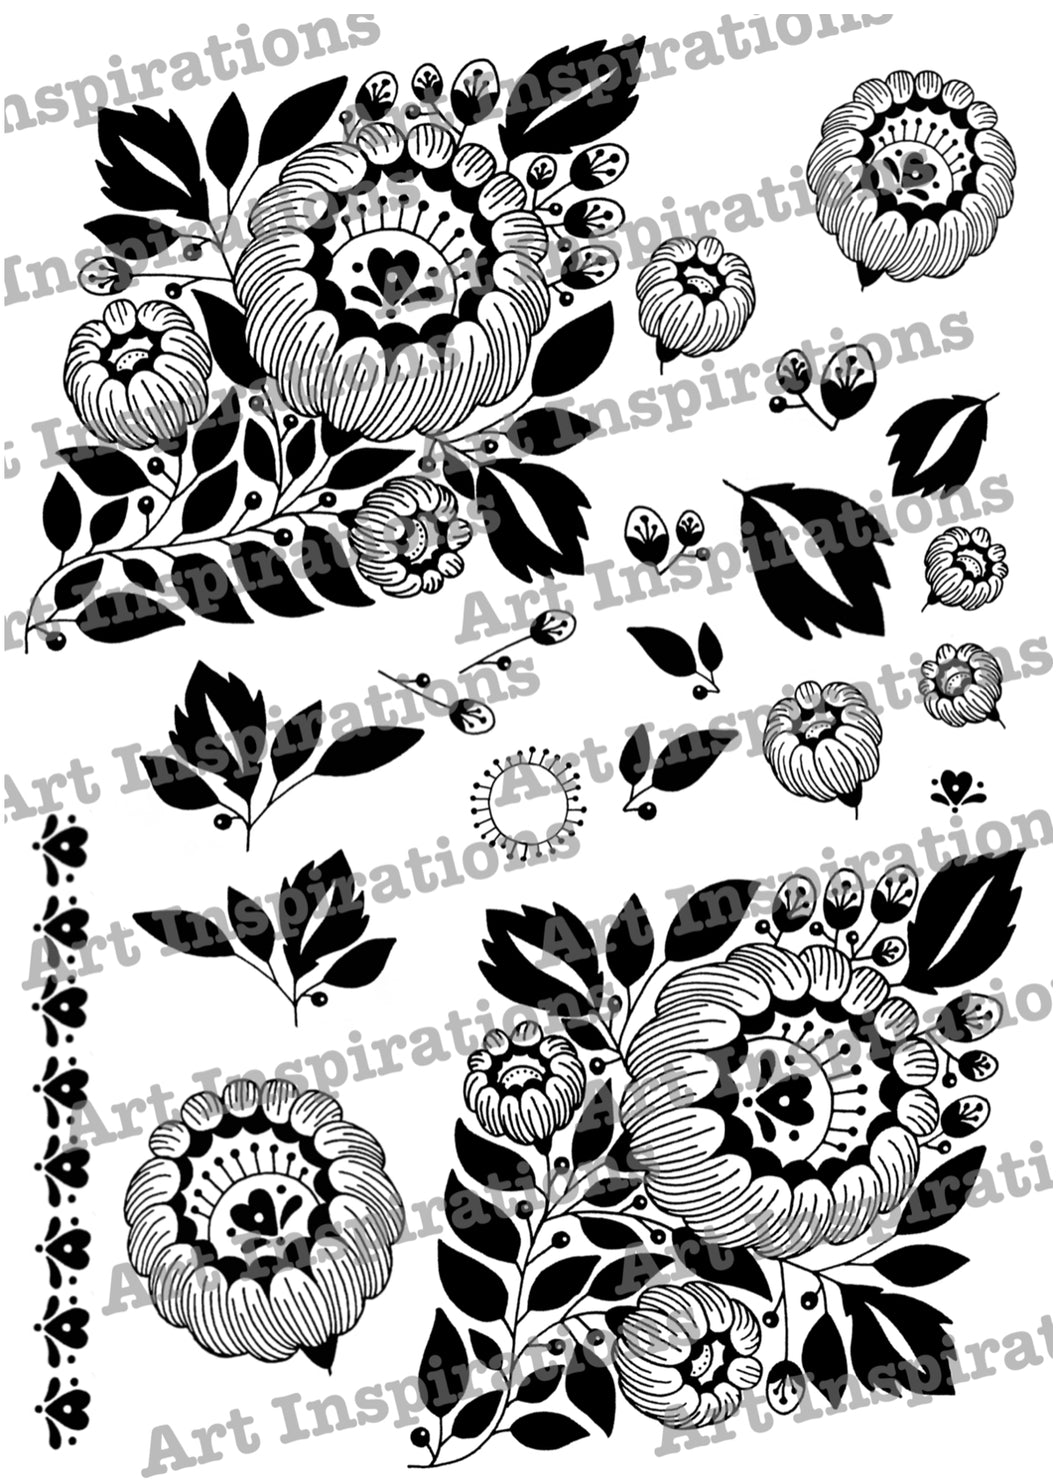 Art Inspirations by Wensdi Made A5 Clear Stamp Sheet - Floral Diamond Border - 21 Stamps